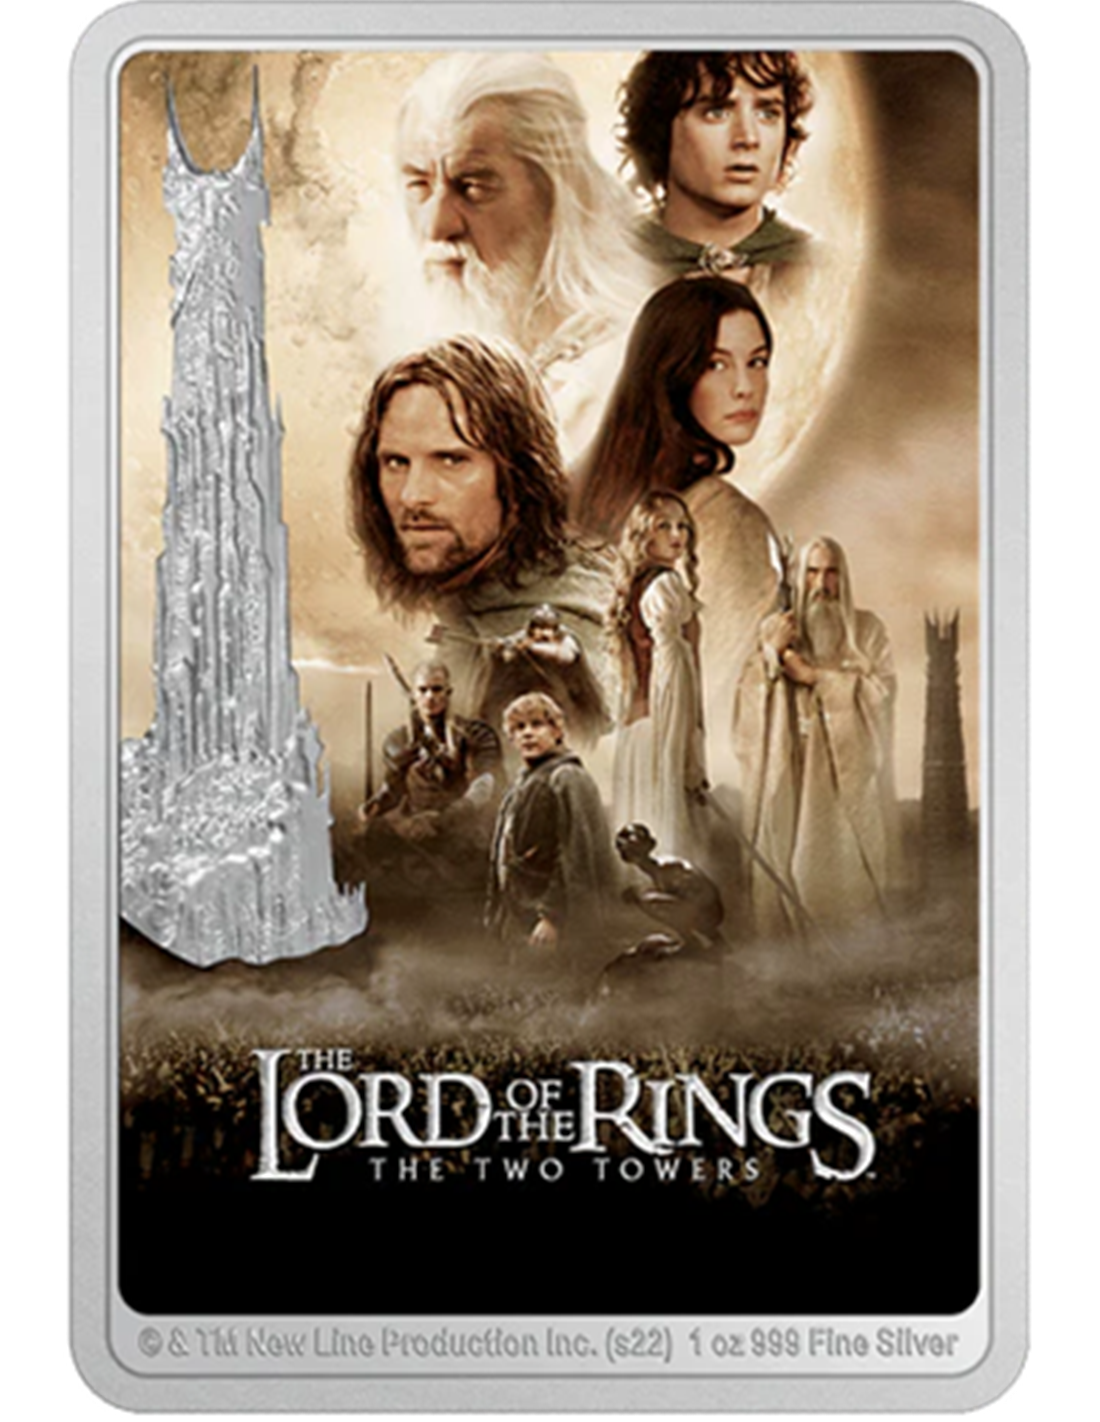 the lord of the rings the two towers dvd cover